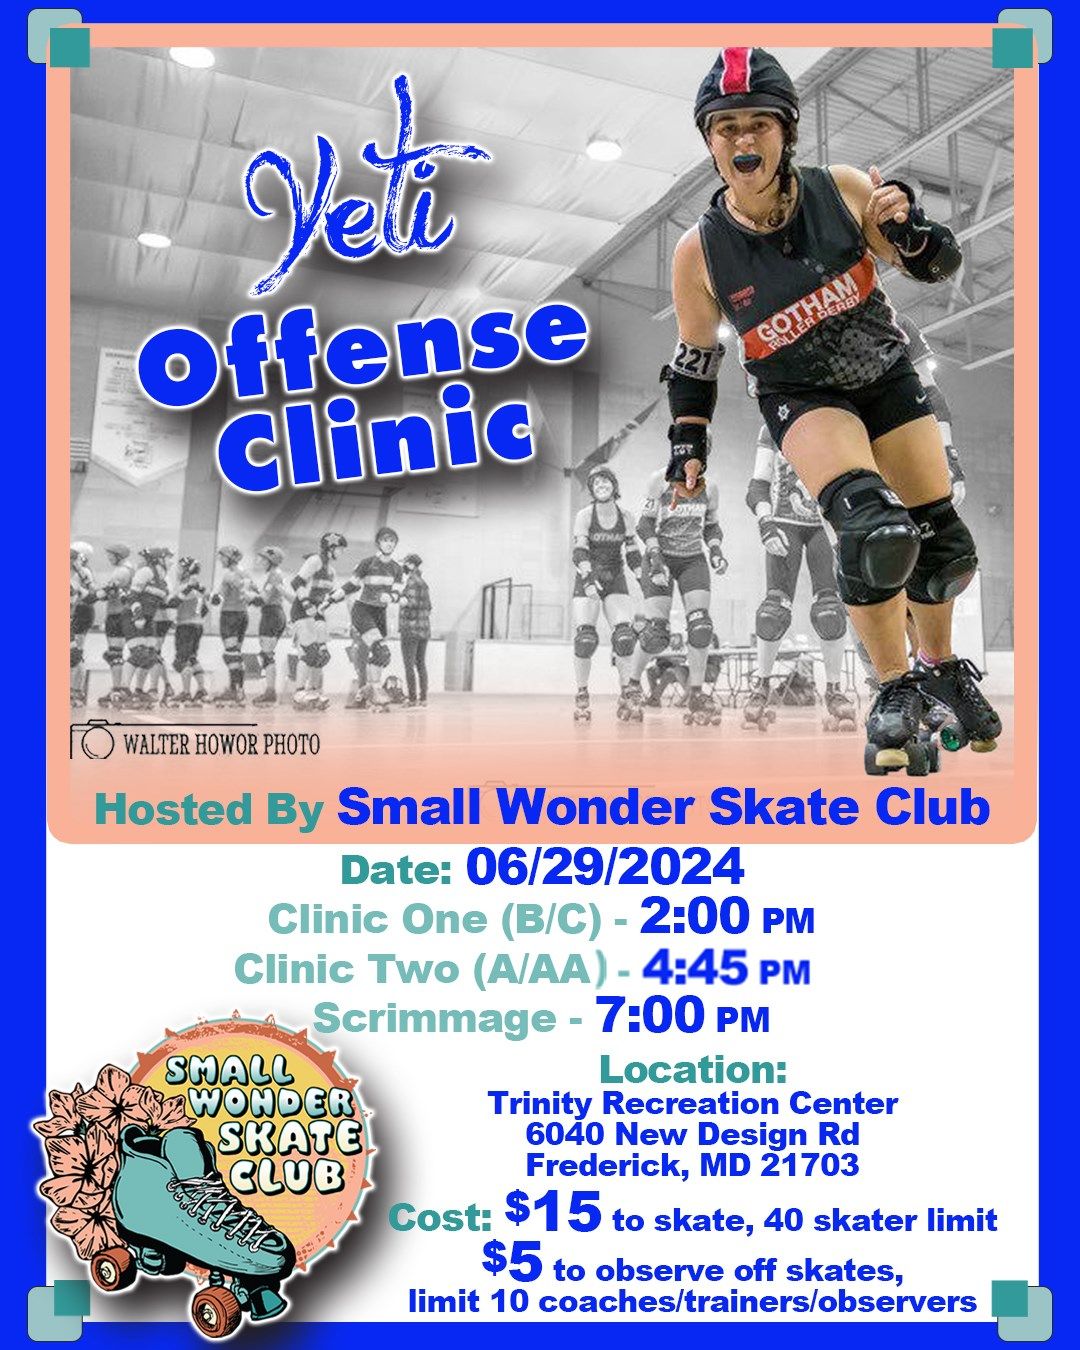 Yeti Offense Clinic- hosted by Small Wonder Skate Club!